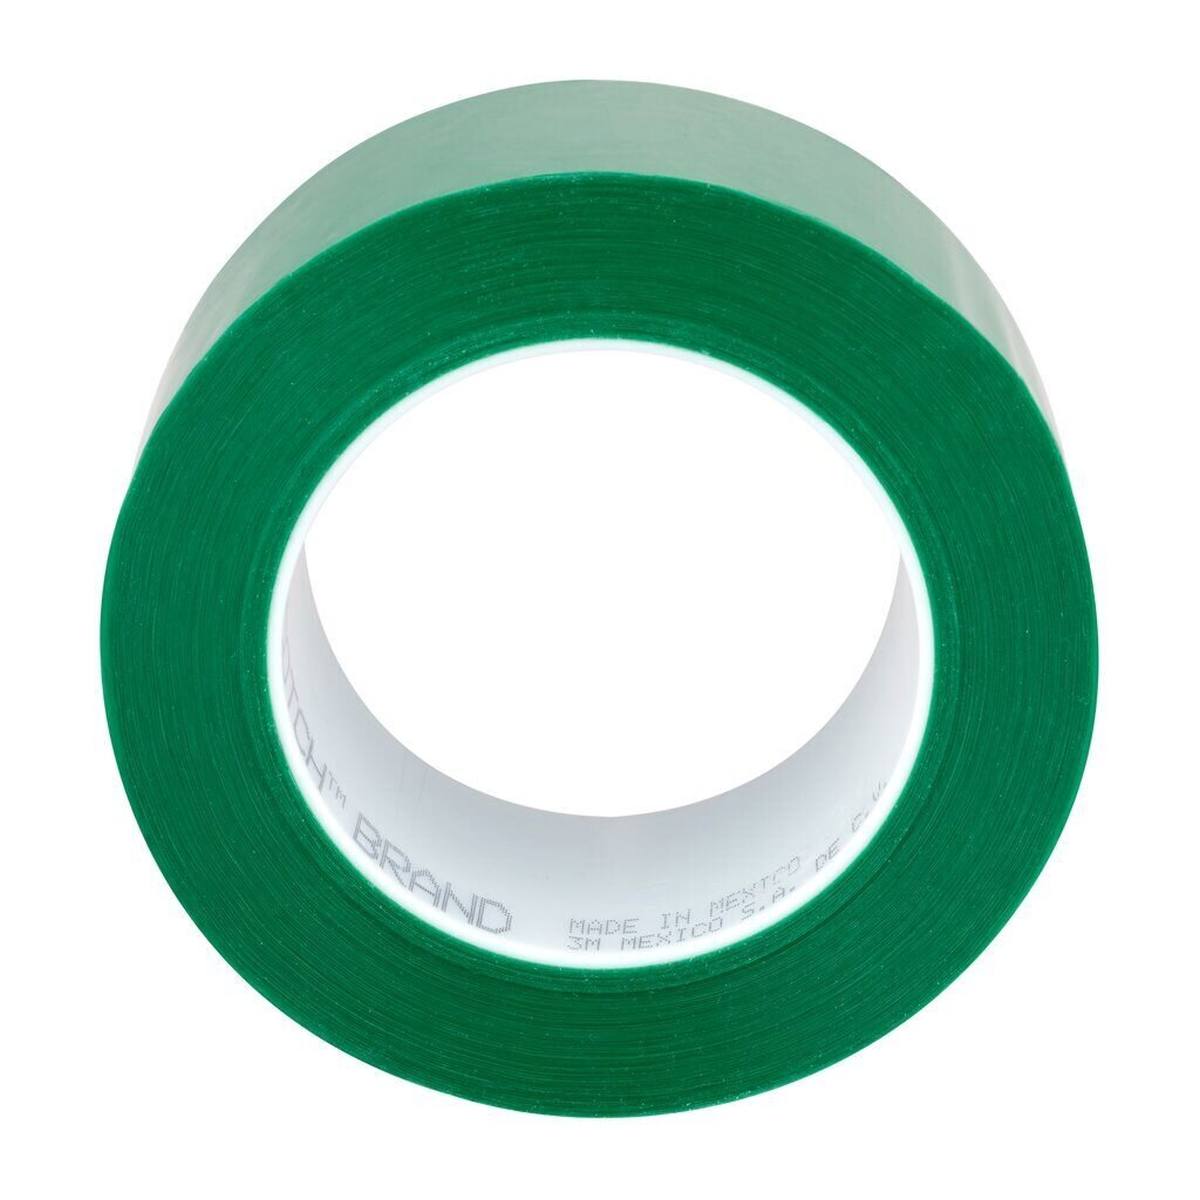 3M high temperature polyester adhesive tape 851, green, 50.8 mm x 66 m, 101.6 µm